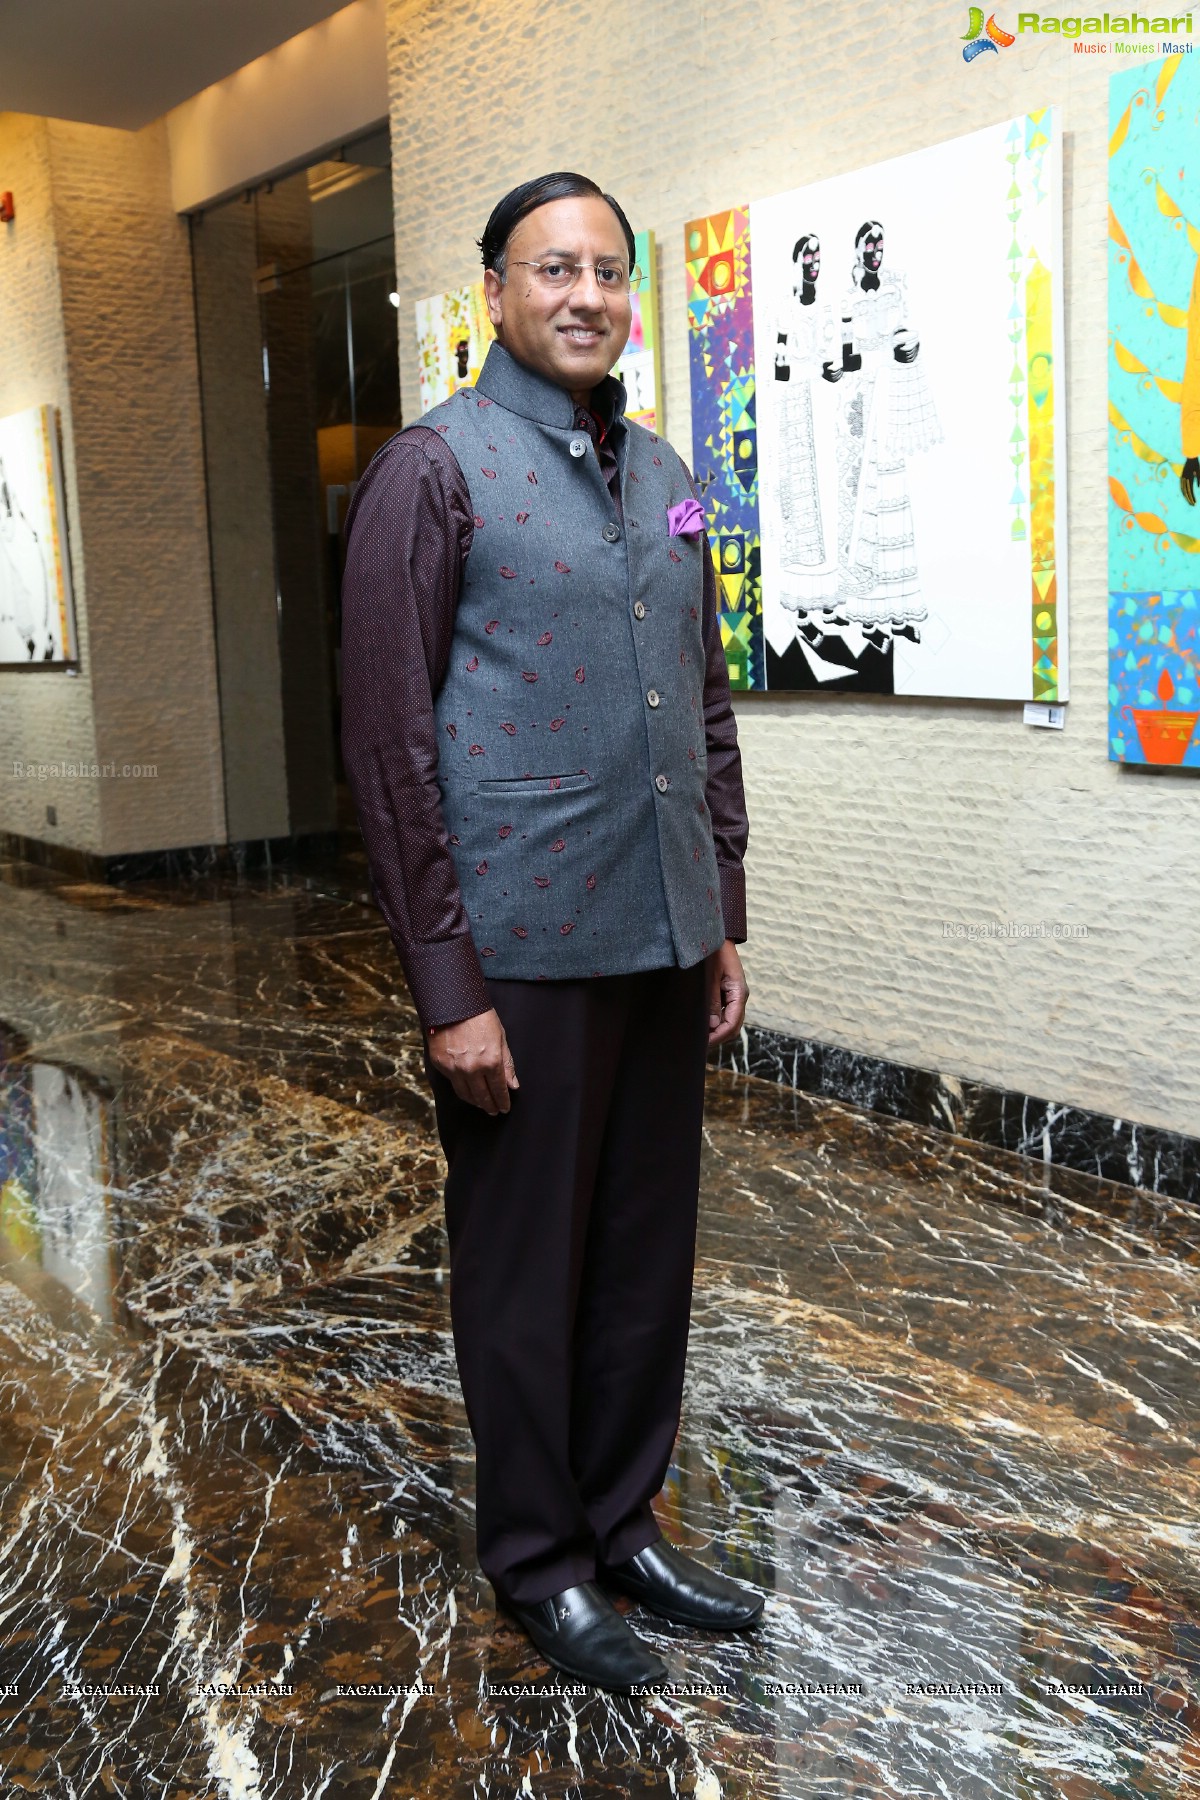 ‘Symphonies of Ethereal Realms’ - An Exhibition of Paintings by Anuradha Thakur at Park Hyatt, Hyderabad